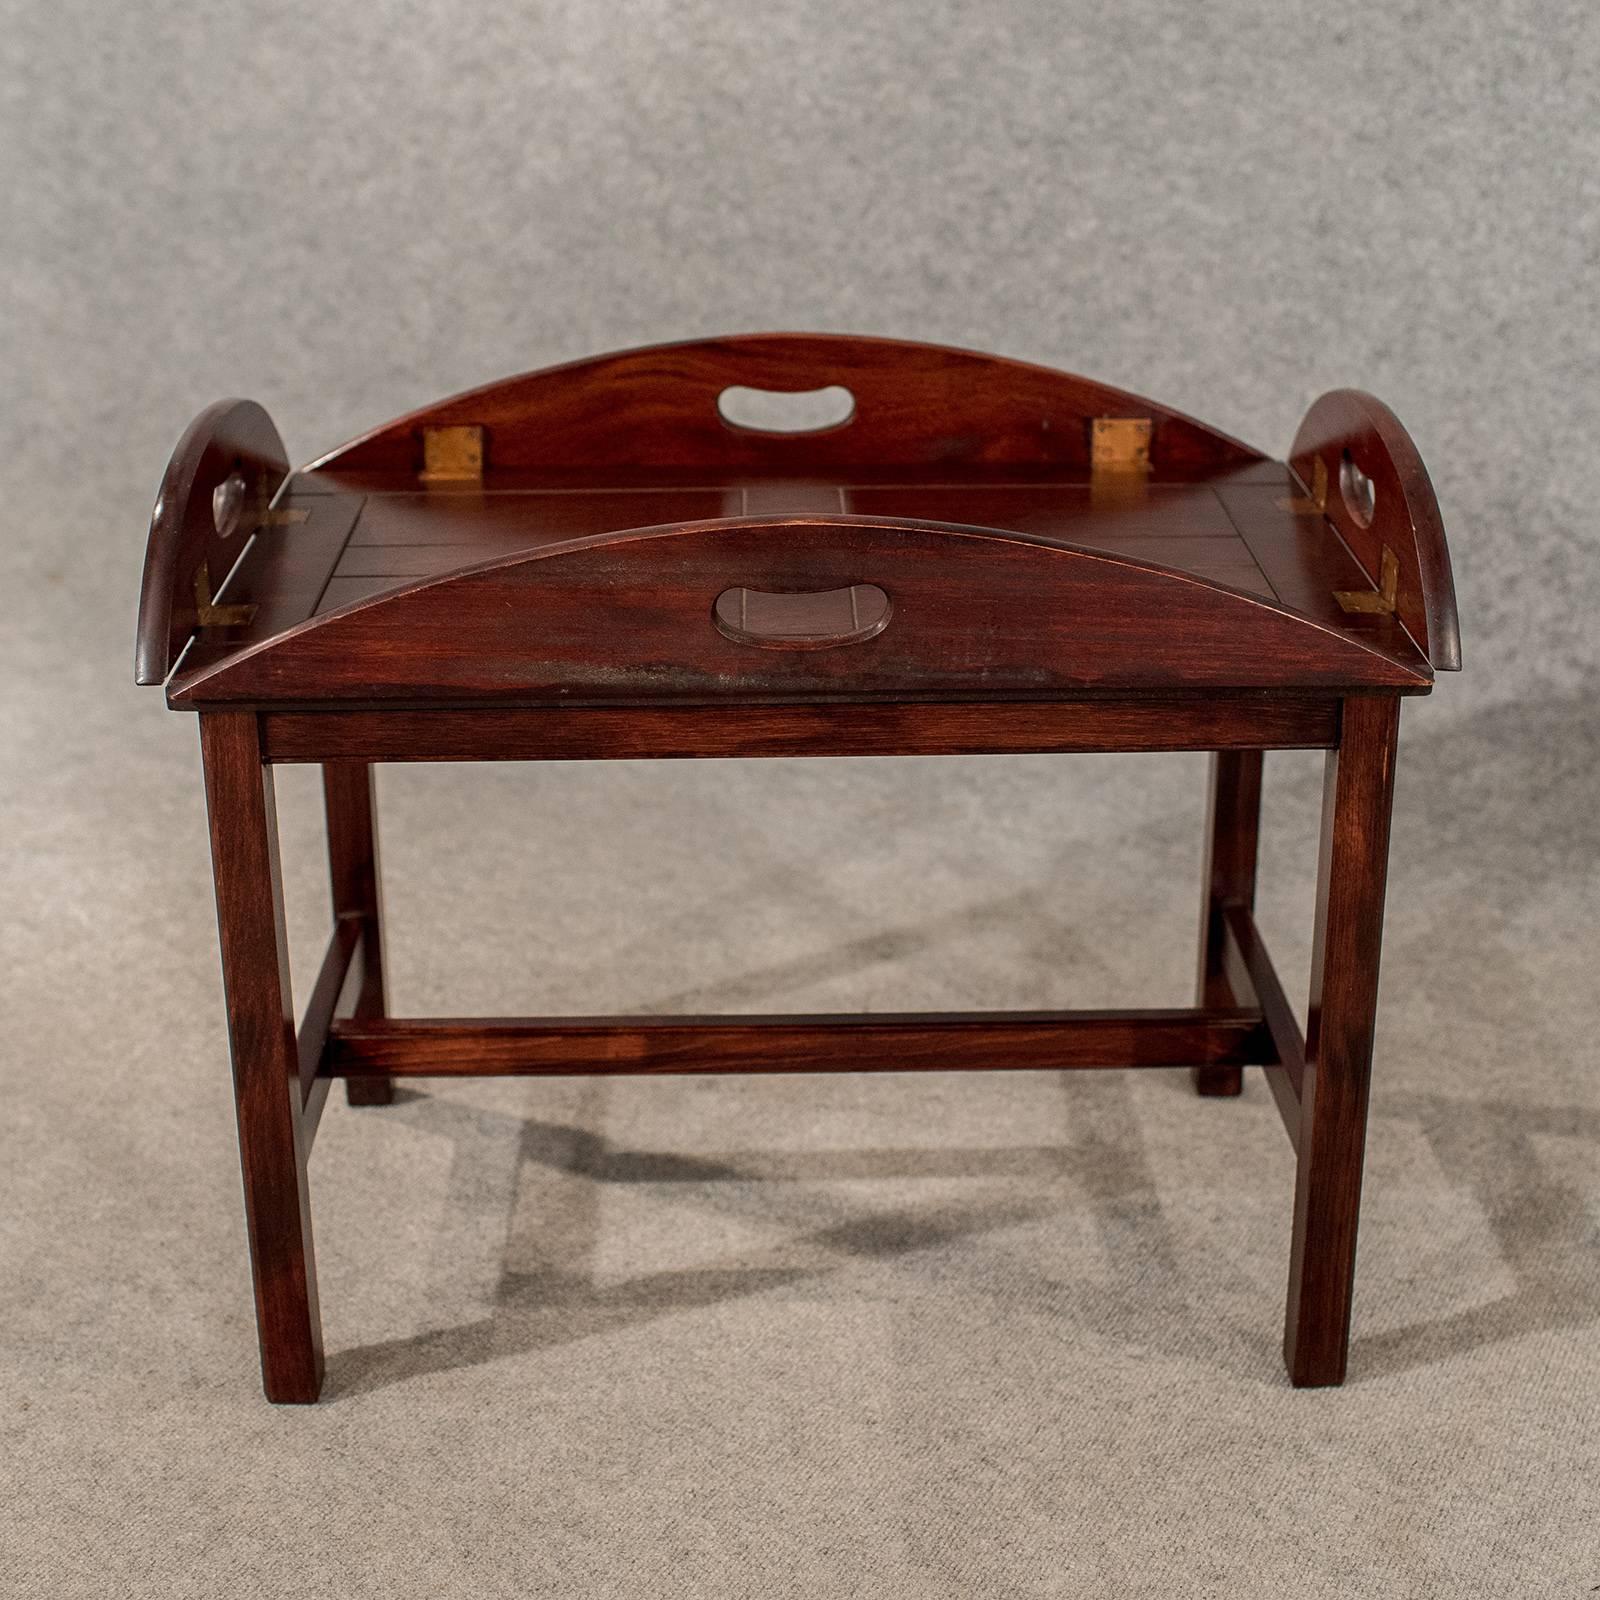 Great Britain (UK) Antique Butler Tray Stand Coffee Tea Table Quality Mahogany, 20th Century